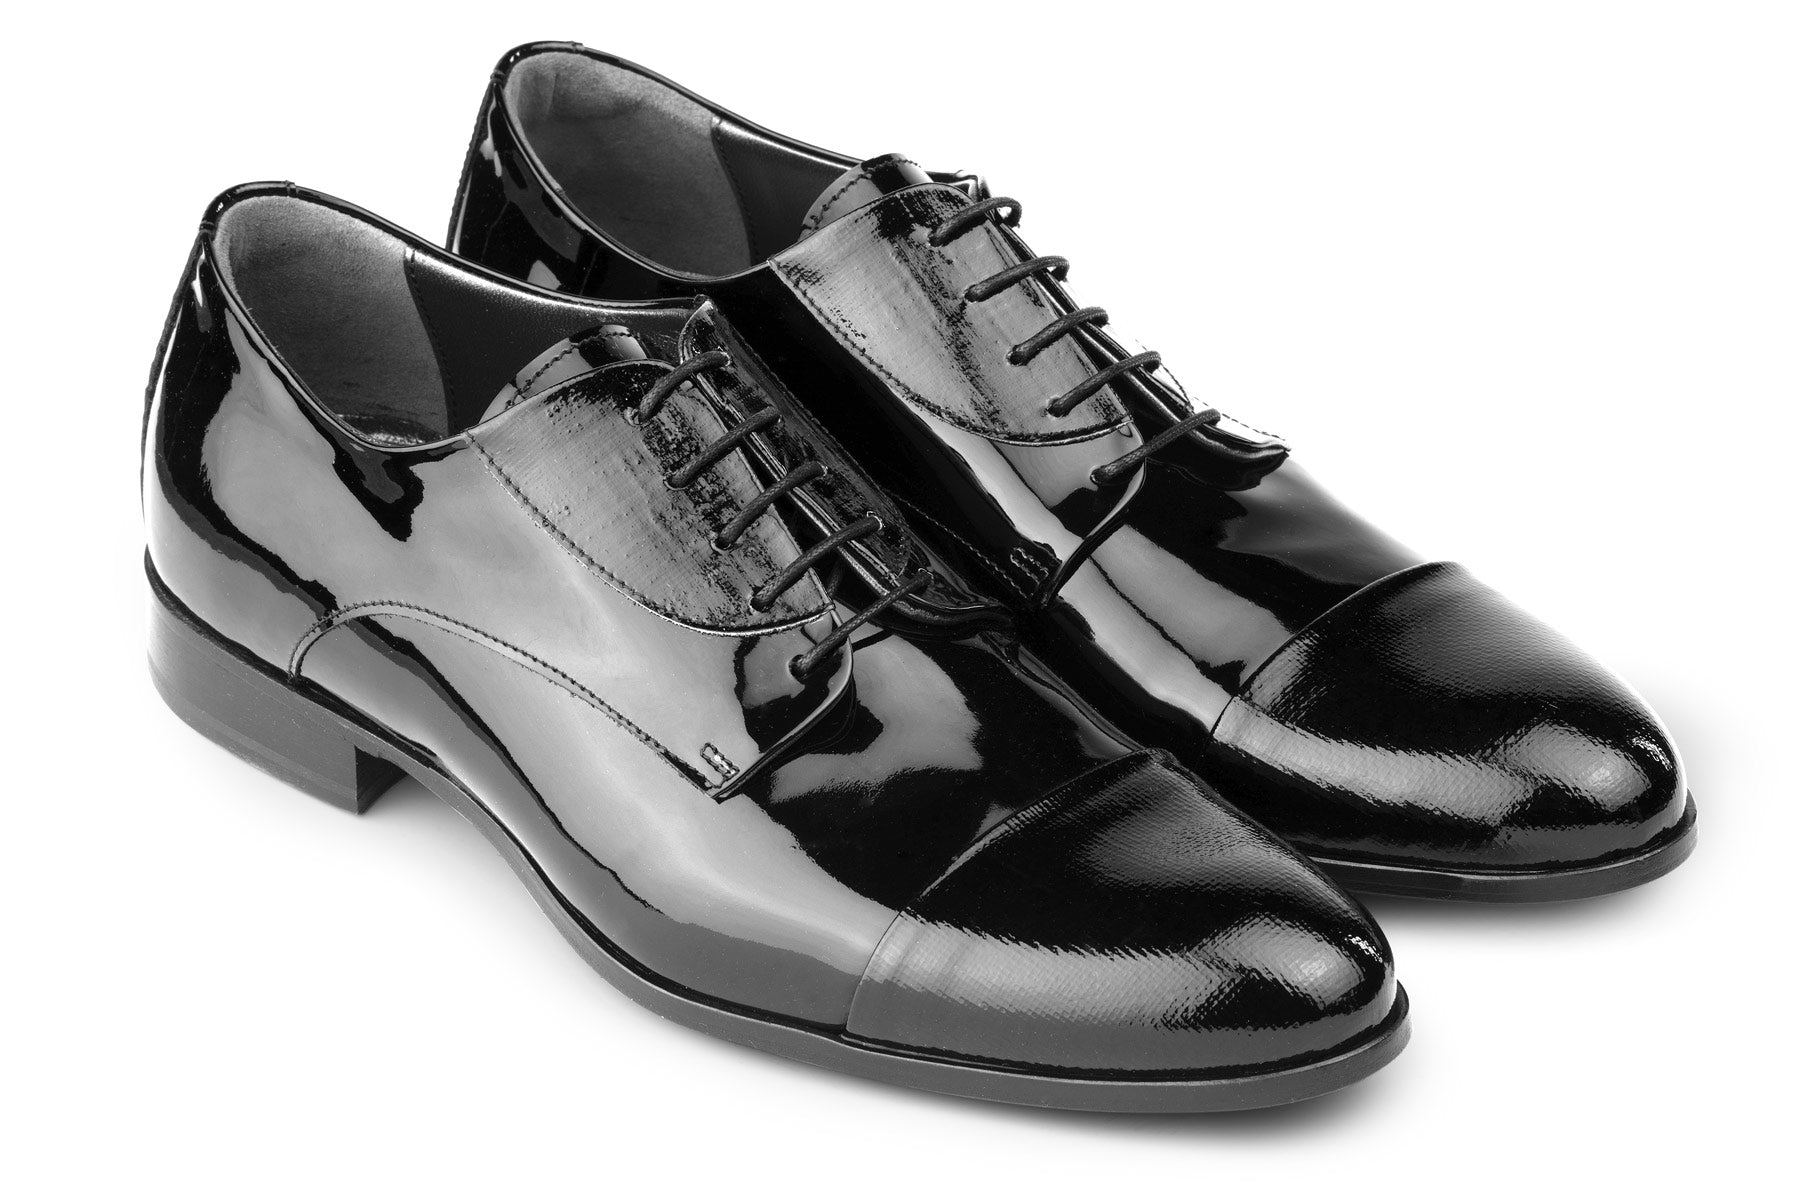 Patent leather ceremonial shoes